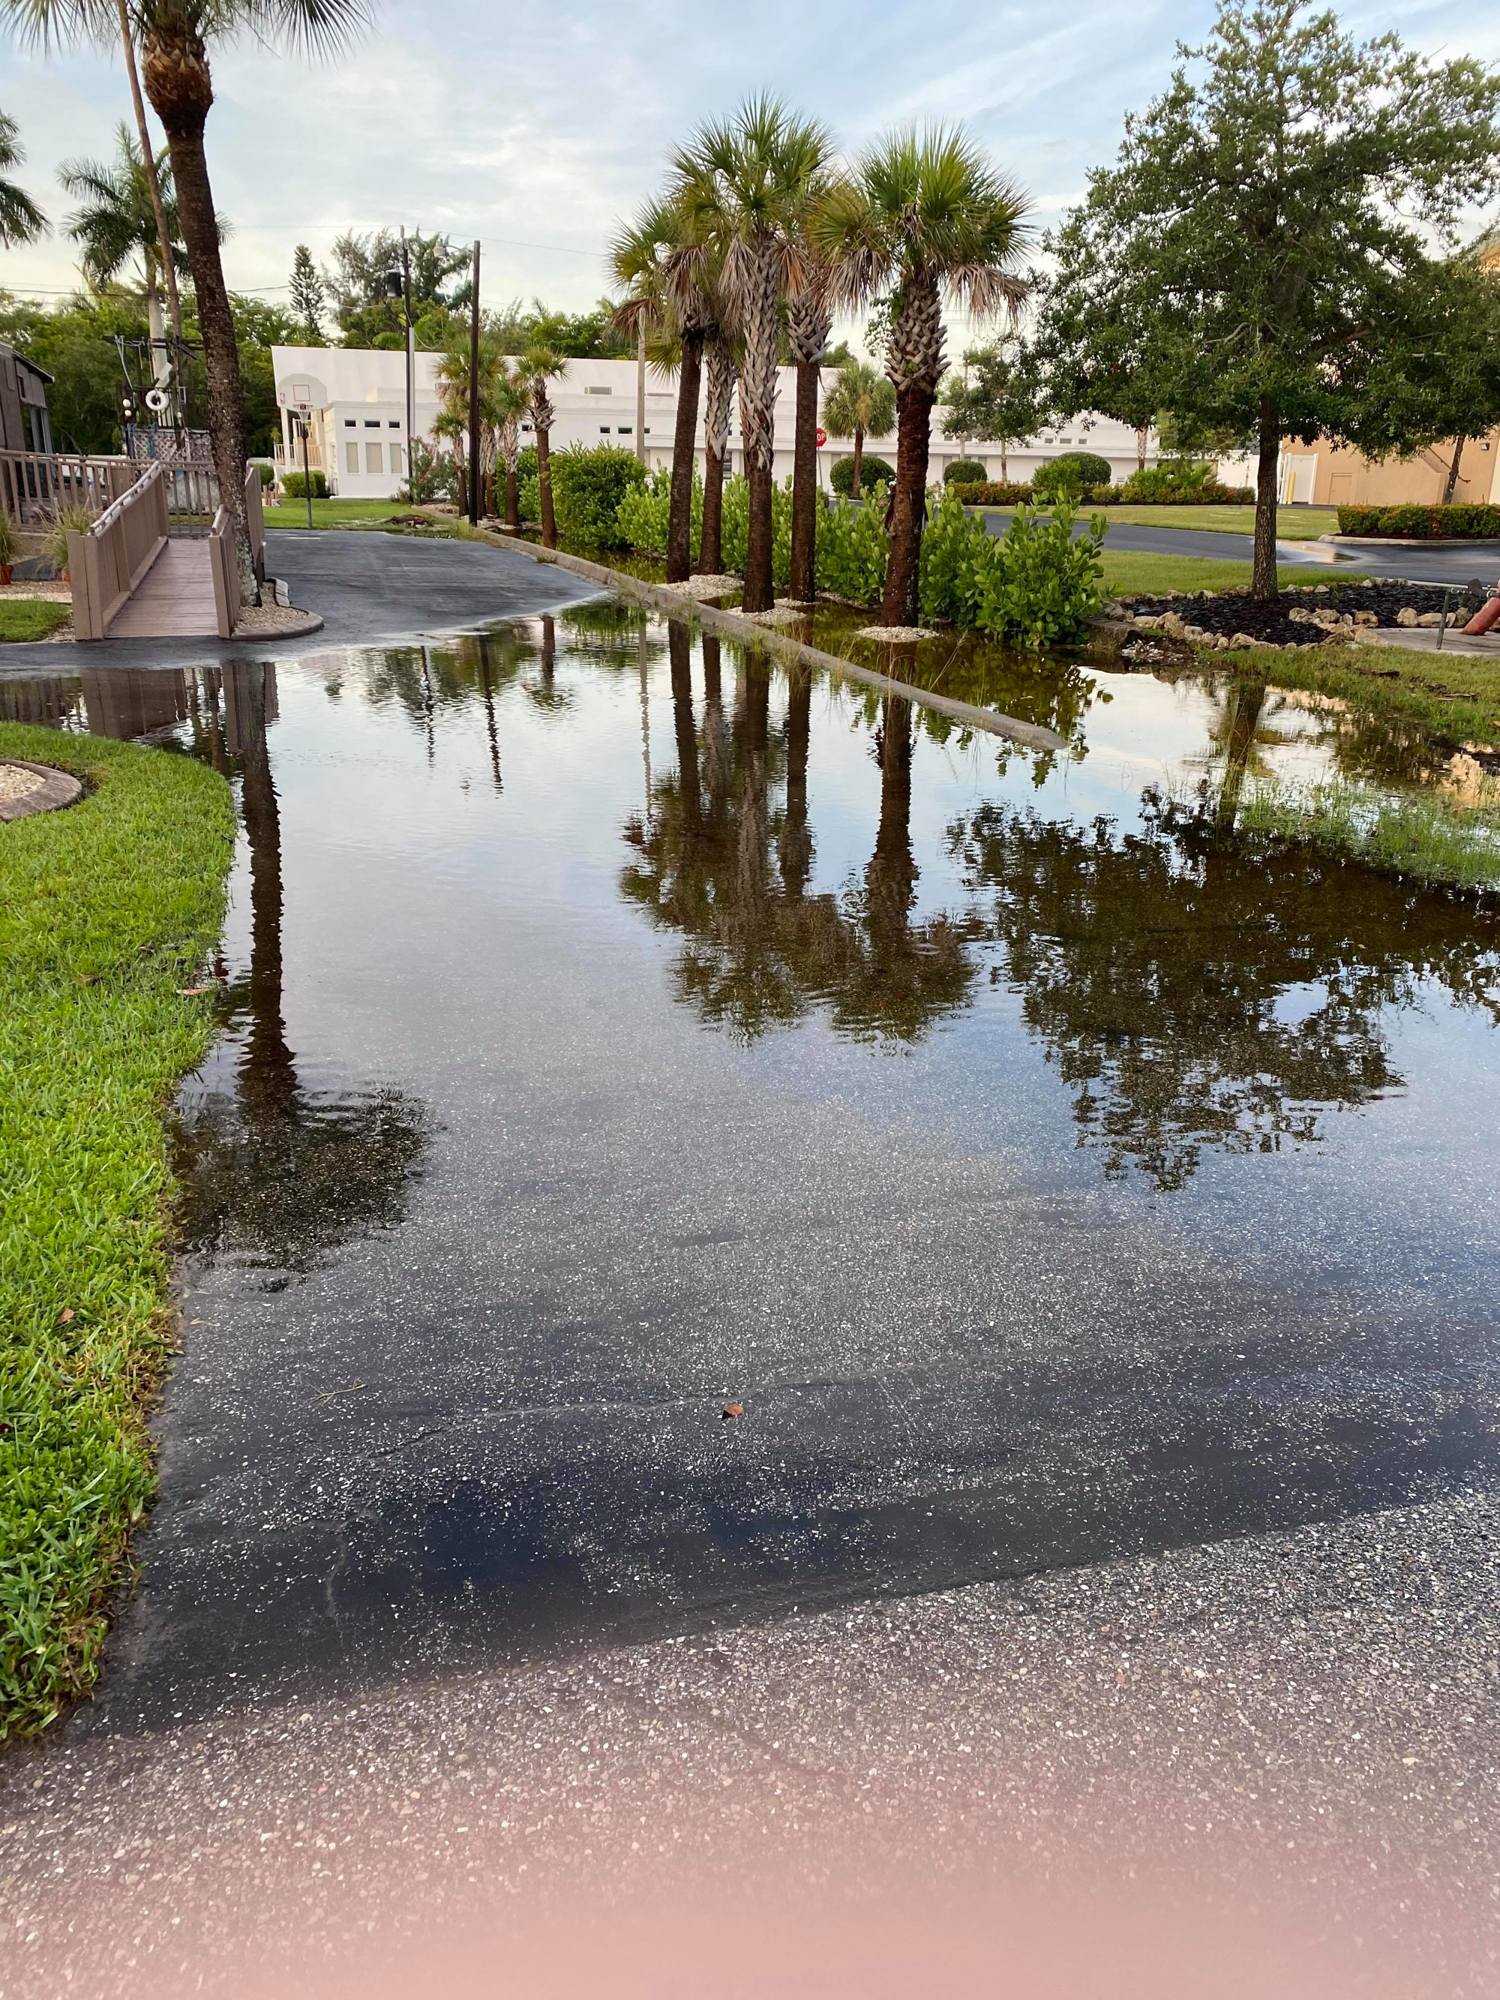 The bioswale between Ross Toussaint's property and Christ Church of Longboat Key was filled with stormwater runoff on July 25, 2020. It overflowed onto Toussaint's property. Photo Credit: Ross Toussaint